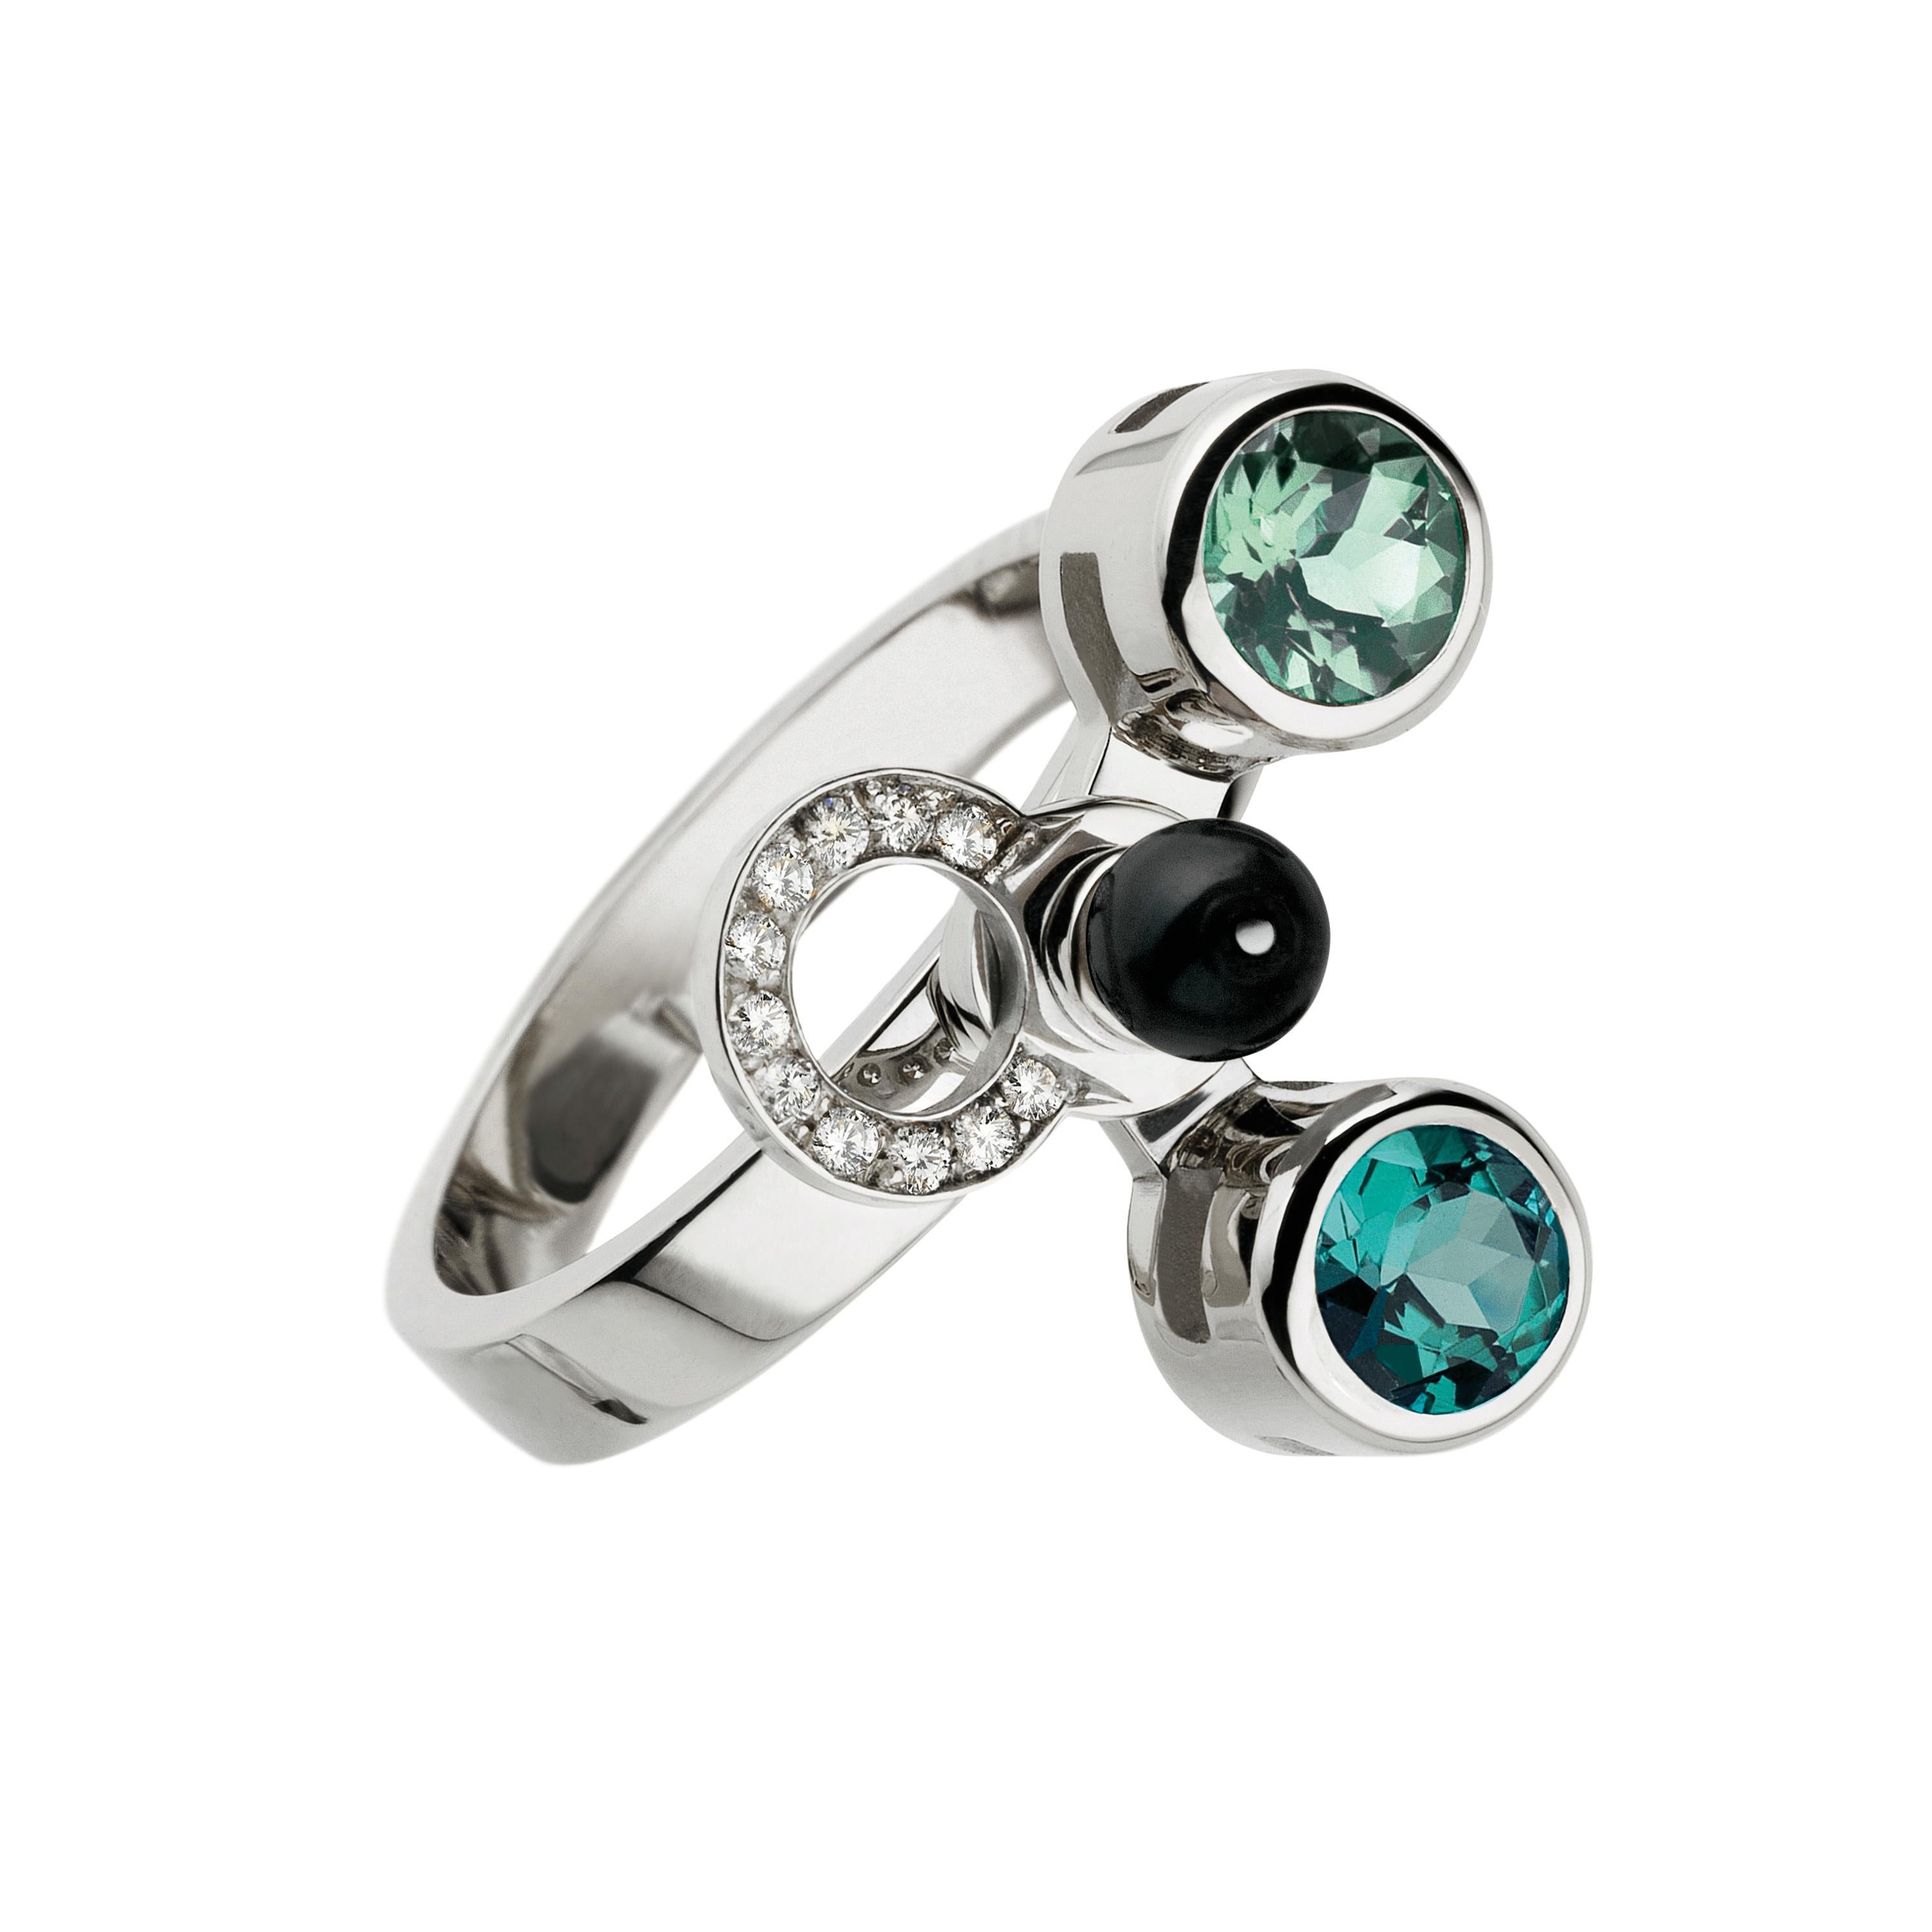 Contemporary Nathalie Jean Diamond Emerald Tourmaline Pearl Onyx Gold Colorful Cocktail Rings